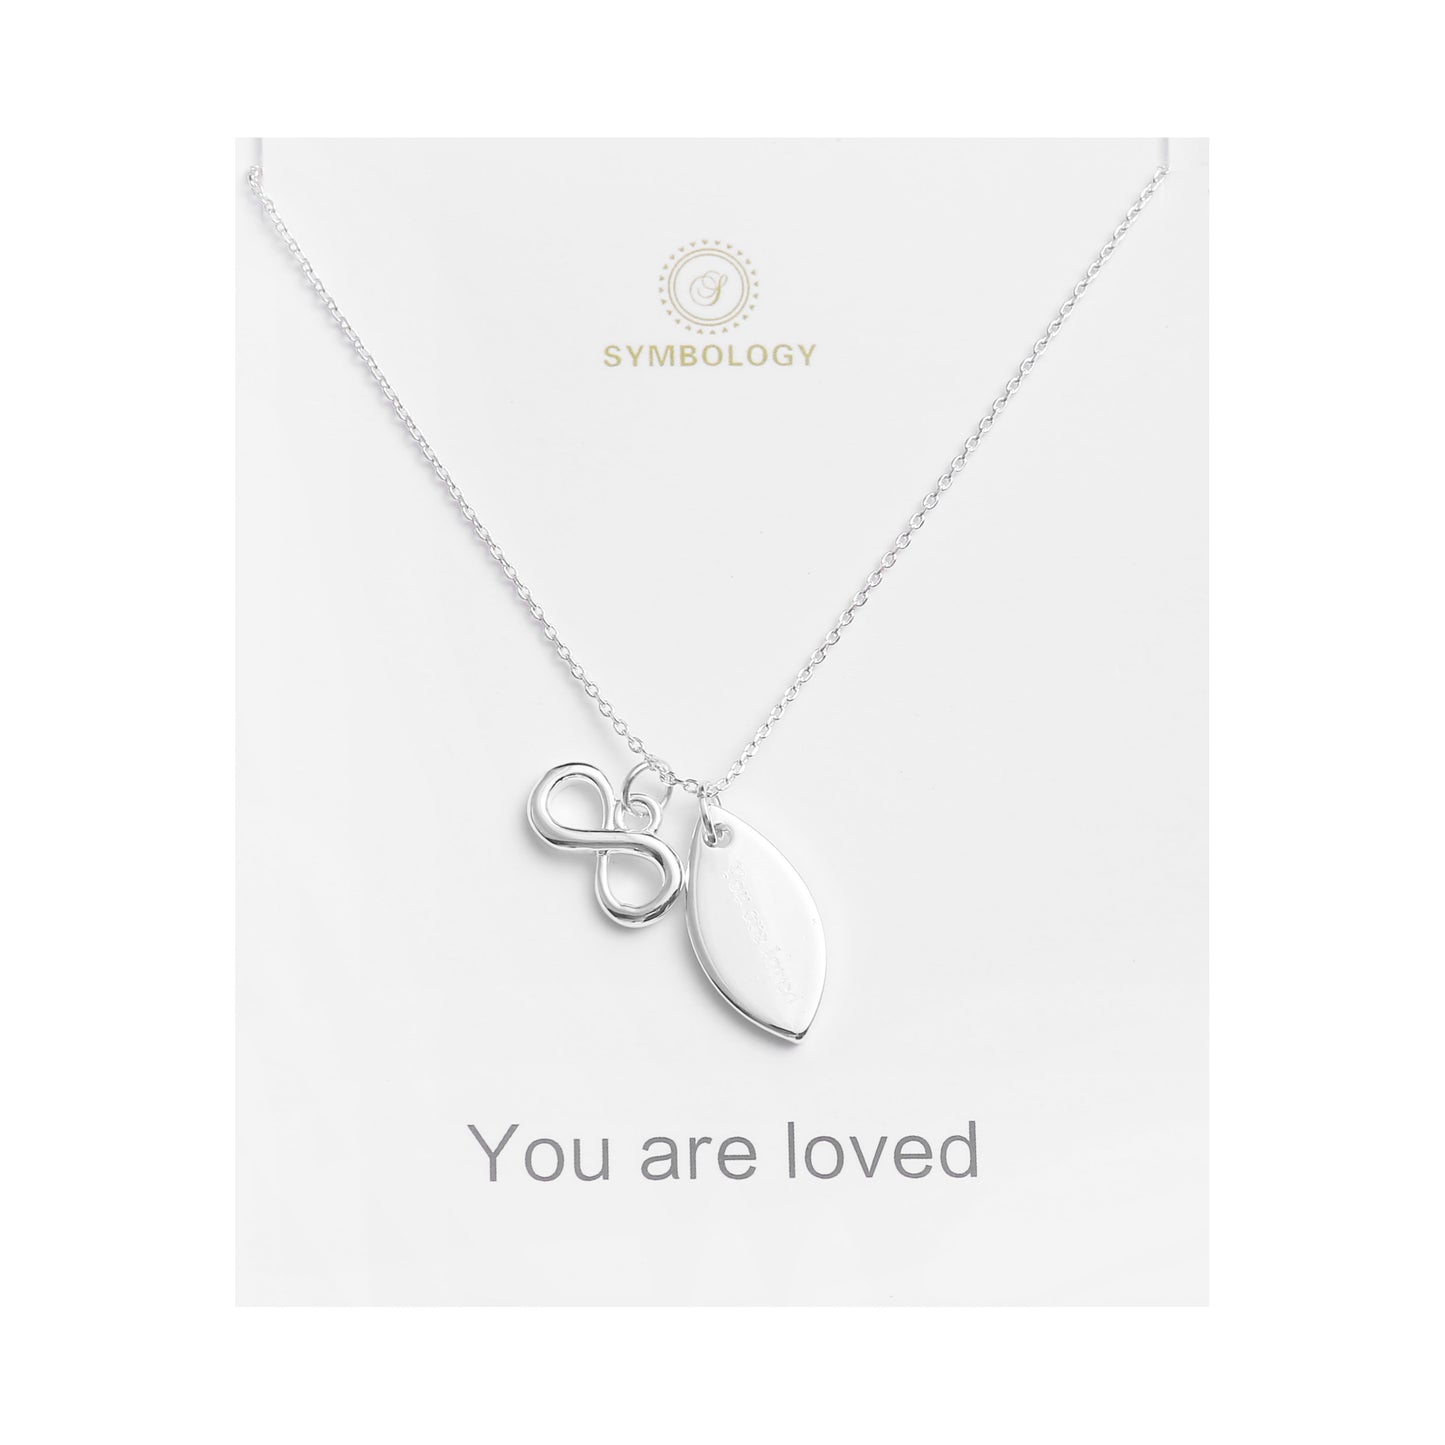 You are Loved Necklace, Silver Infinity Pendant Charm, Symbology, Symbol Necklace, Anniversary, Girlfriend Birthday, Valentine (Gift boxed)